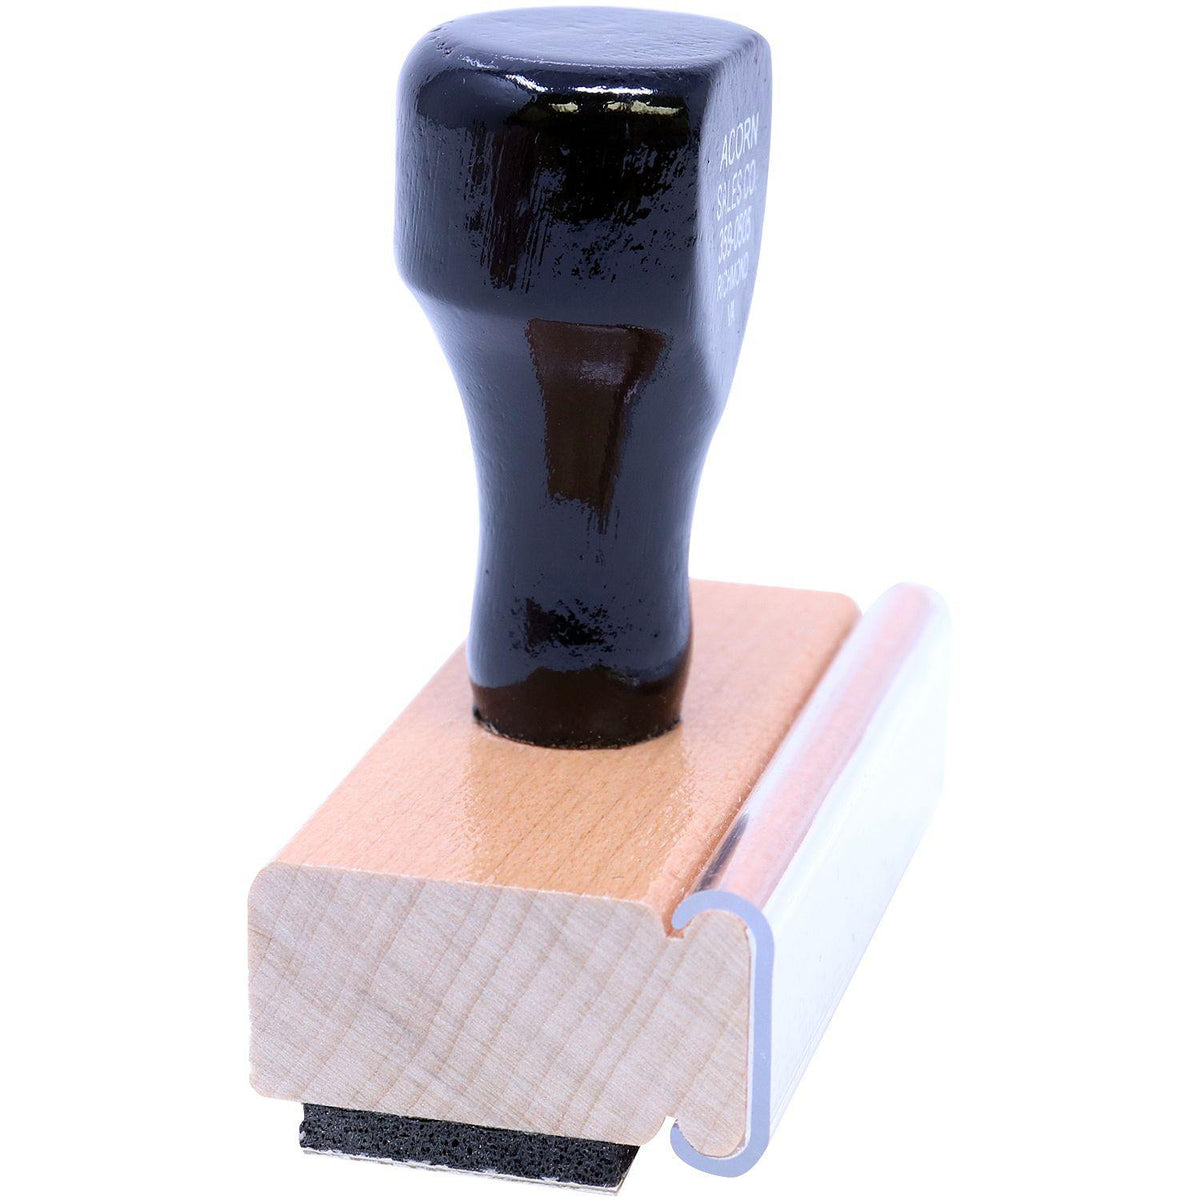 Side View of Large Appraisal Rubber Stamp at an Angle